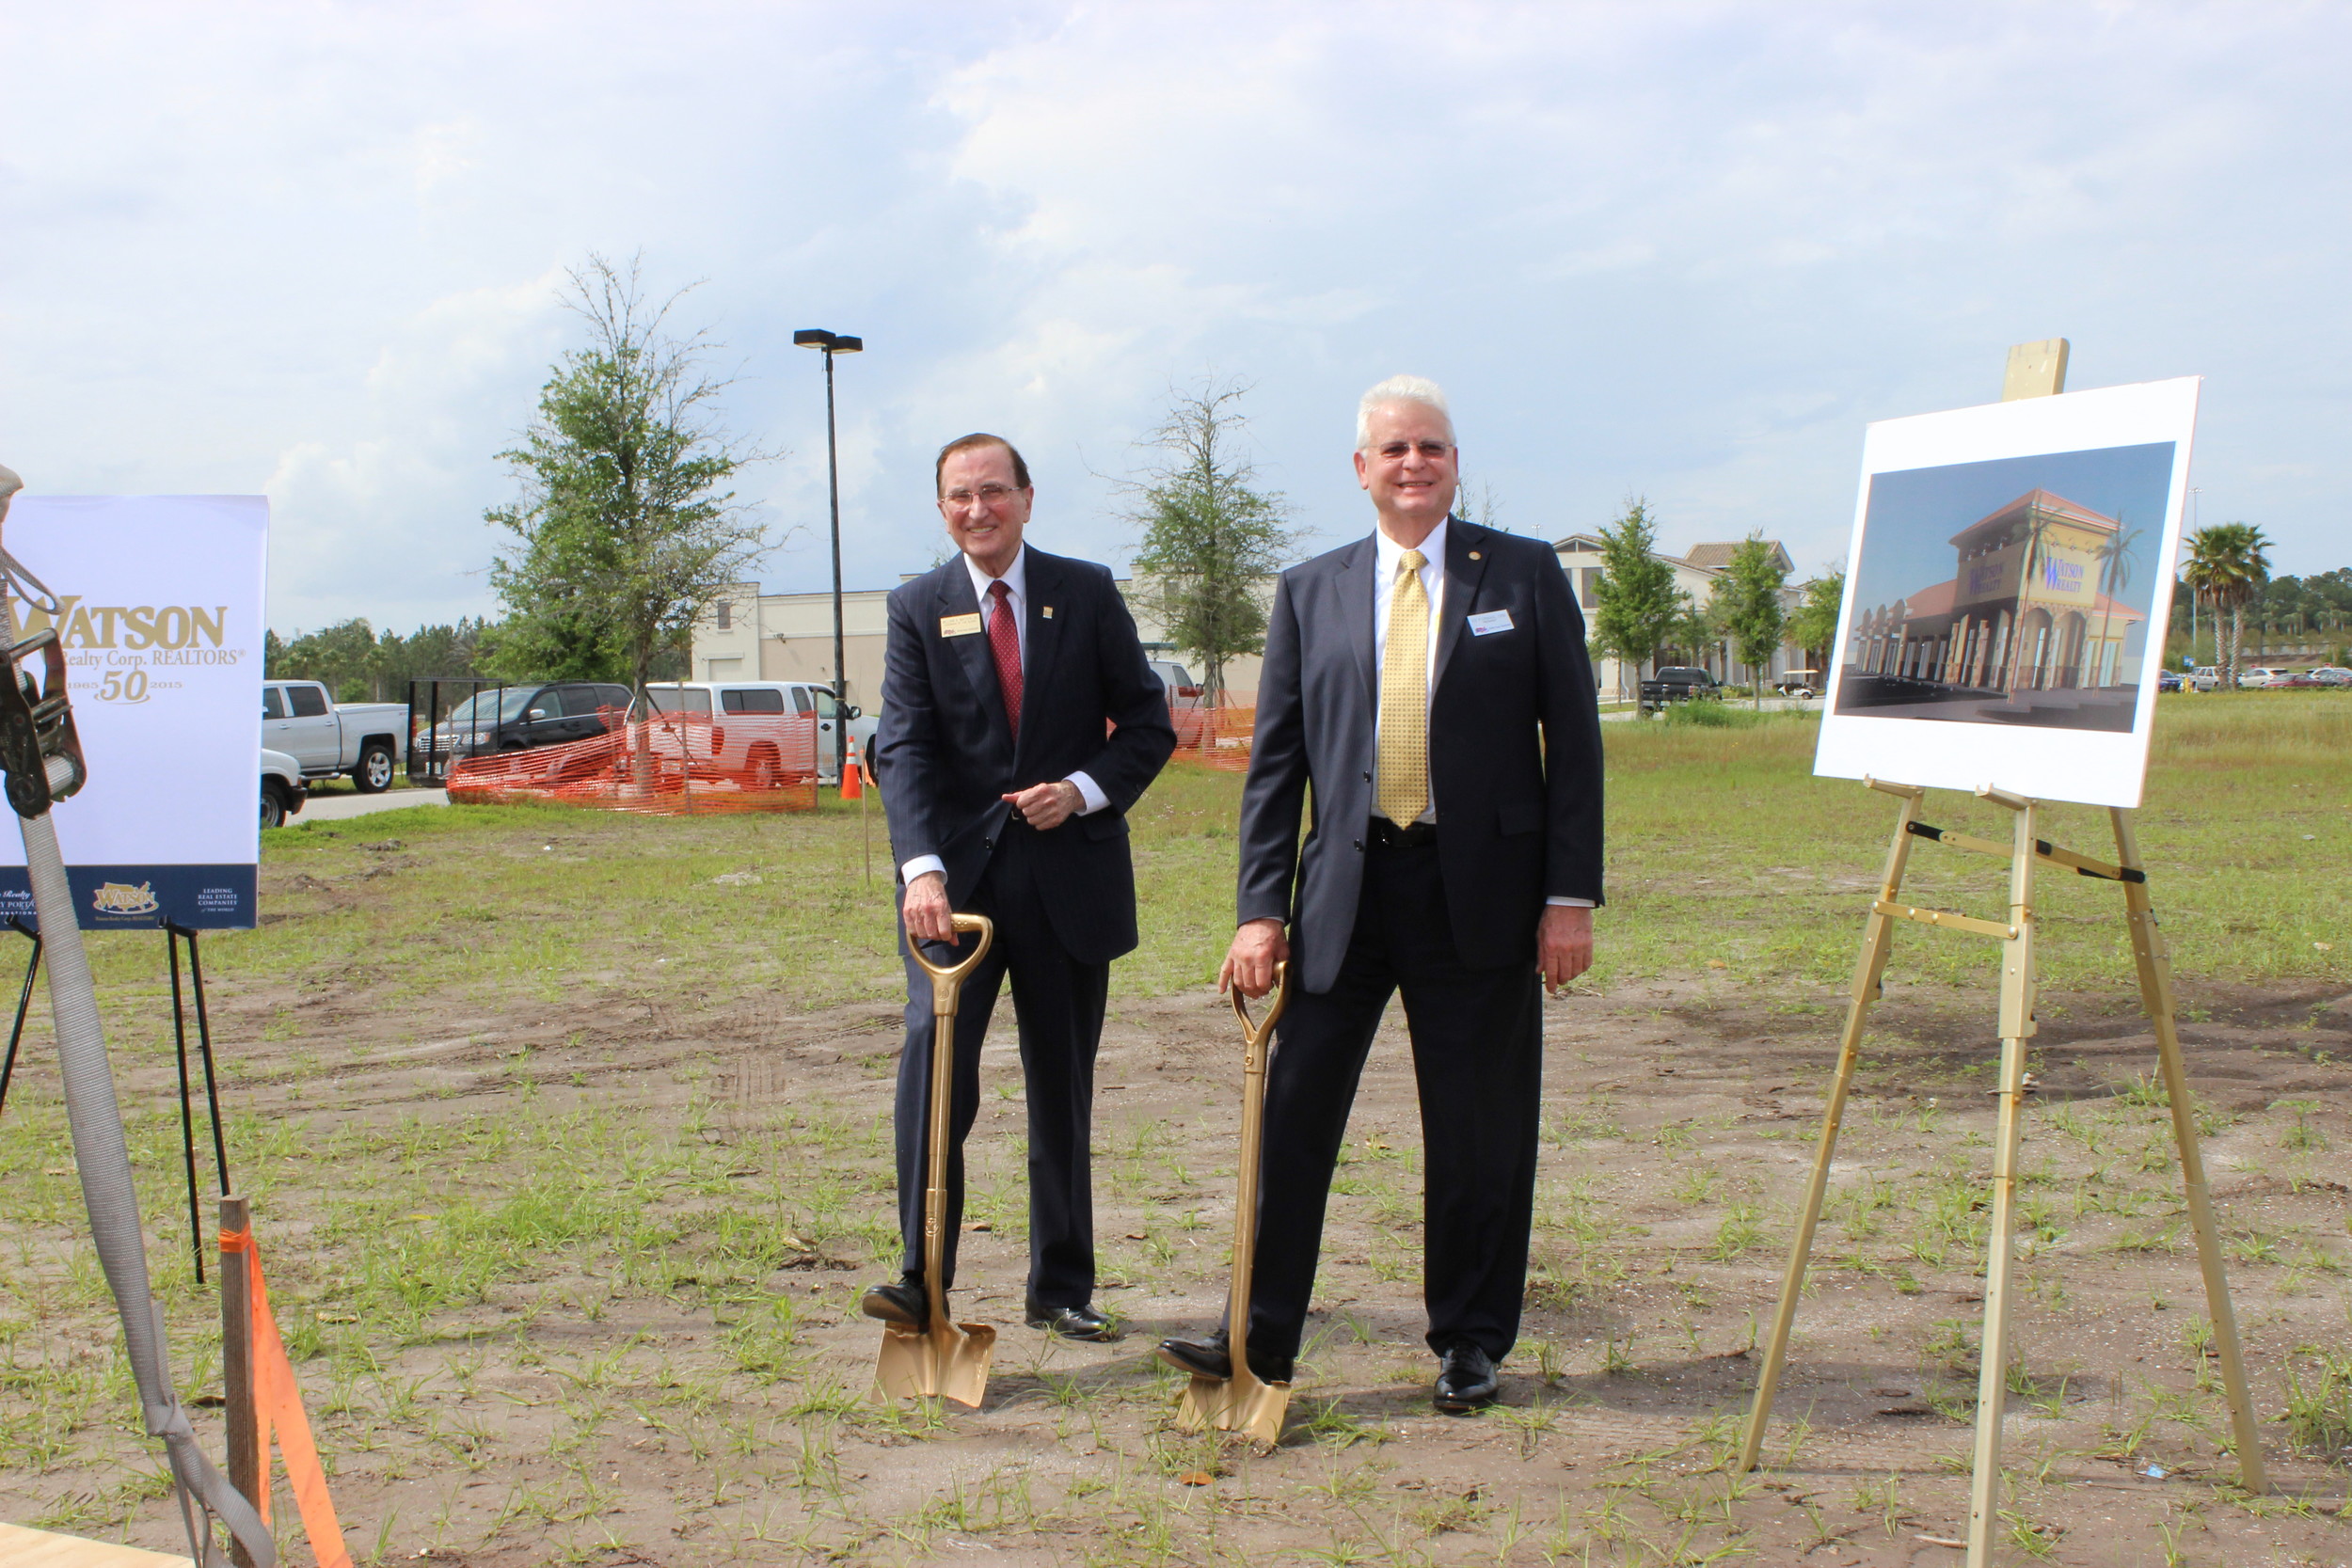 William Watson Jr., founder of Watson Realty Corp, and Ed Forman, Watsonís President, broke ground on their Nocatee location in April 2015. The office, located in Nocatee, includes 4,200 square feet of space for Watson offices as well as 1,800 square feet of additional commercial rental space.